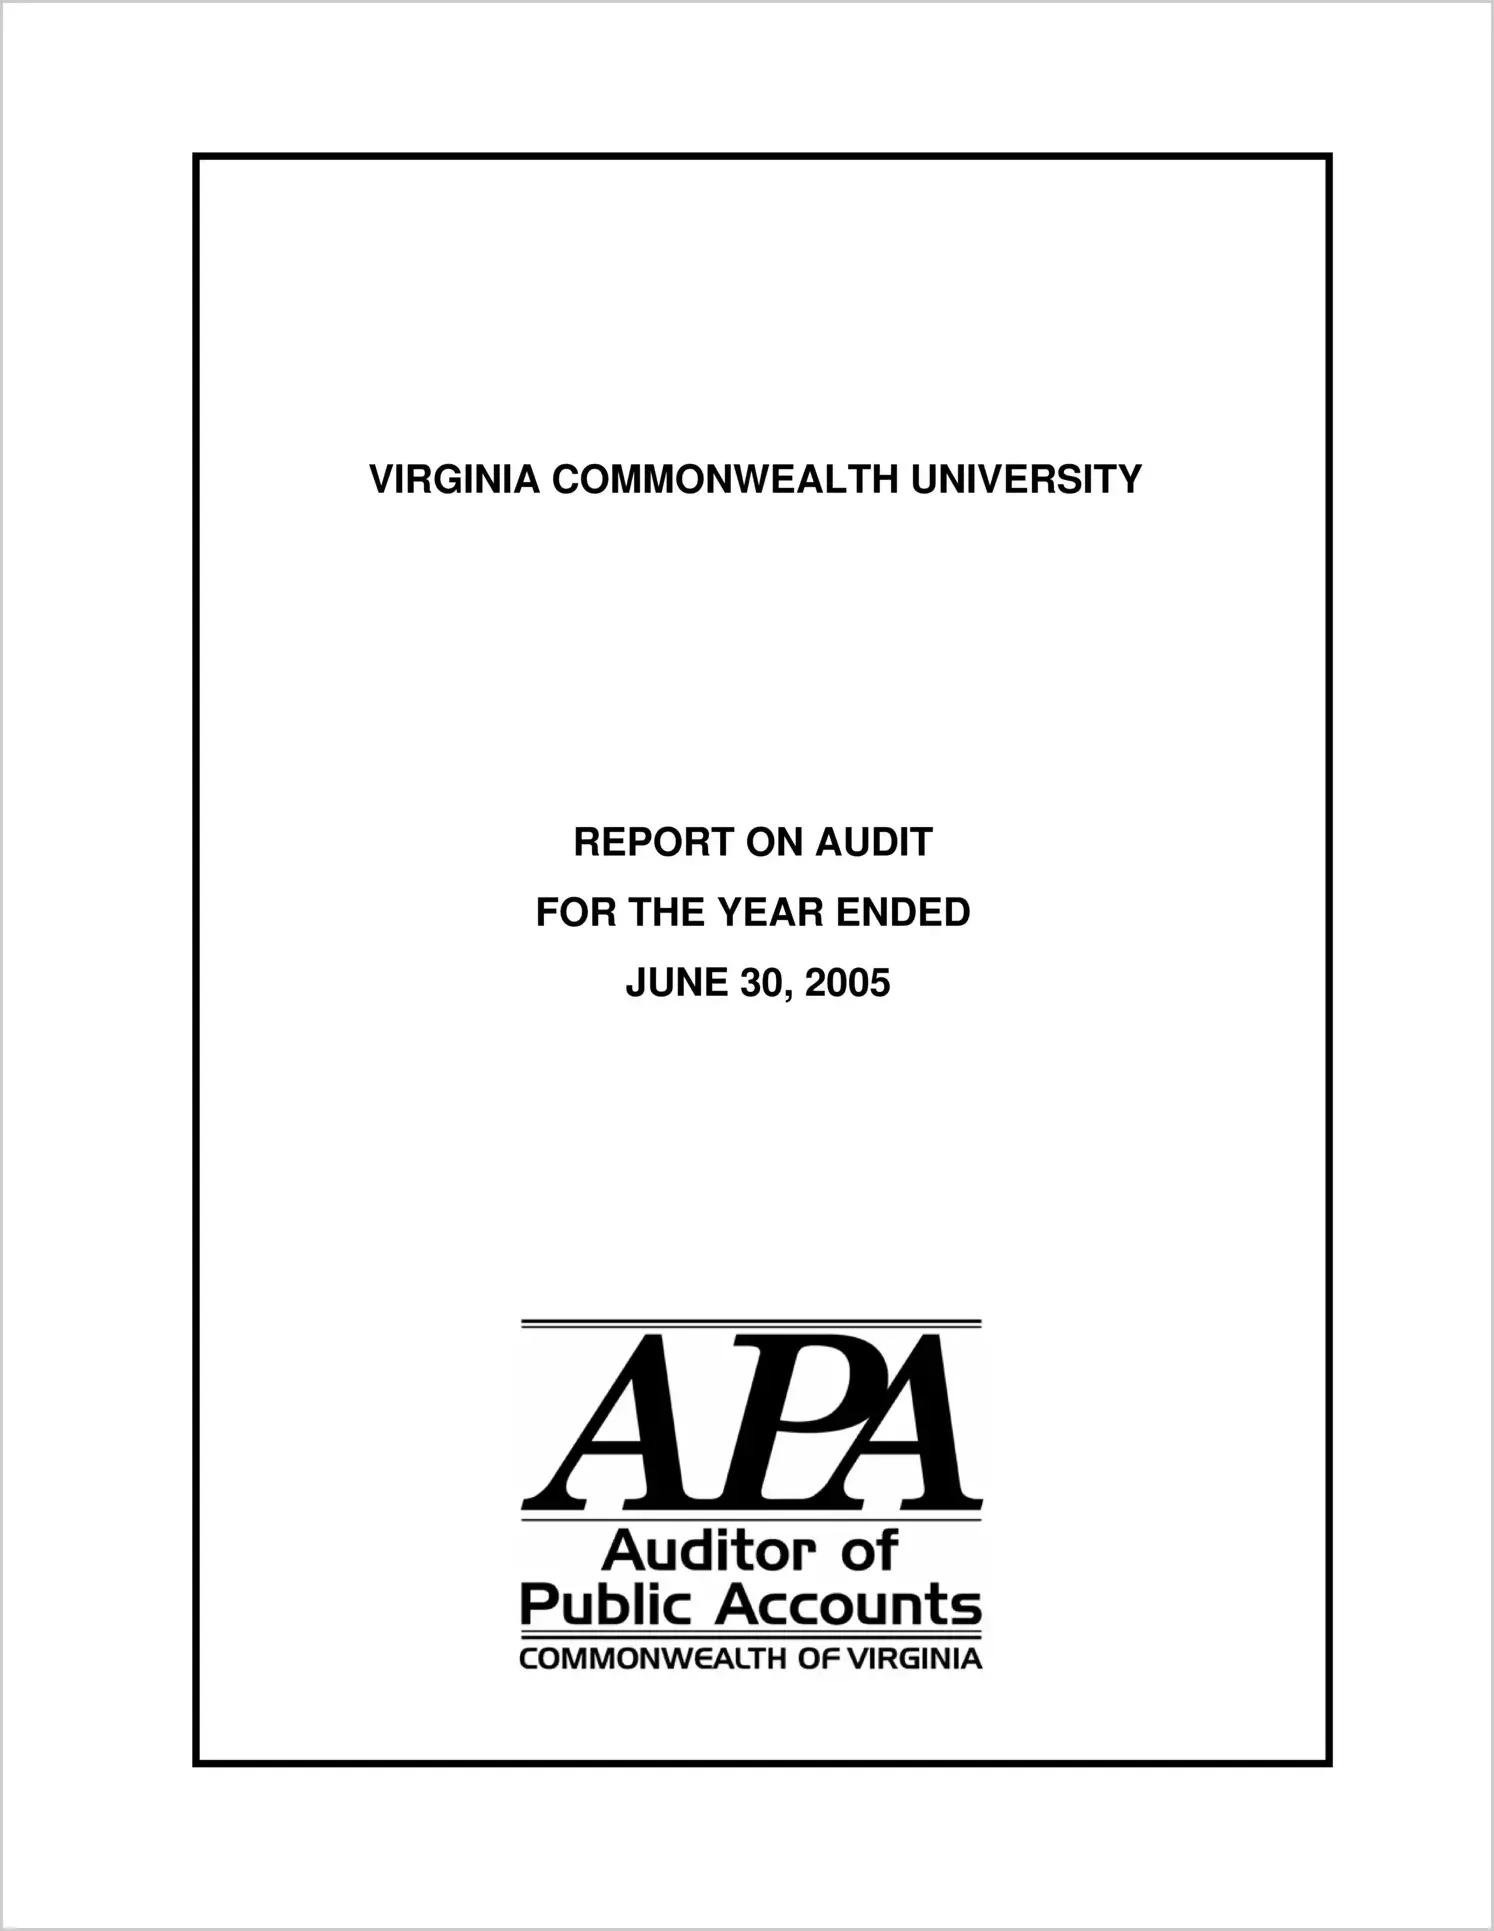 Virginia Commonwealth University for the year ended June 30, 2005